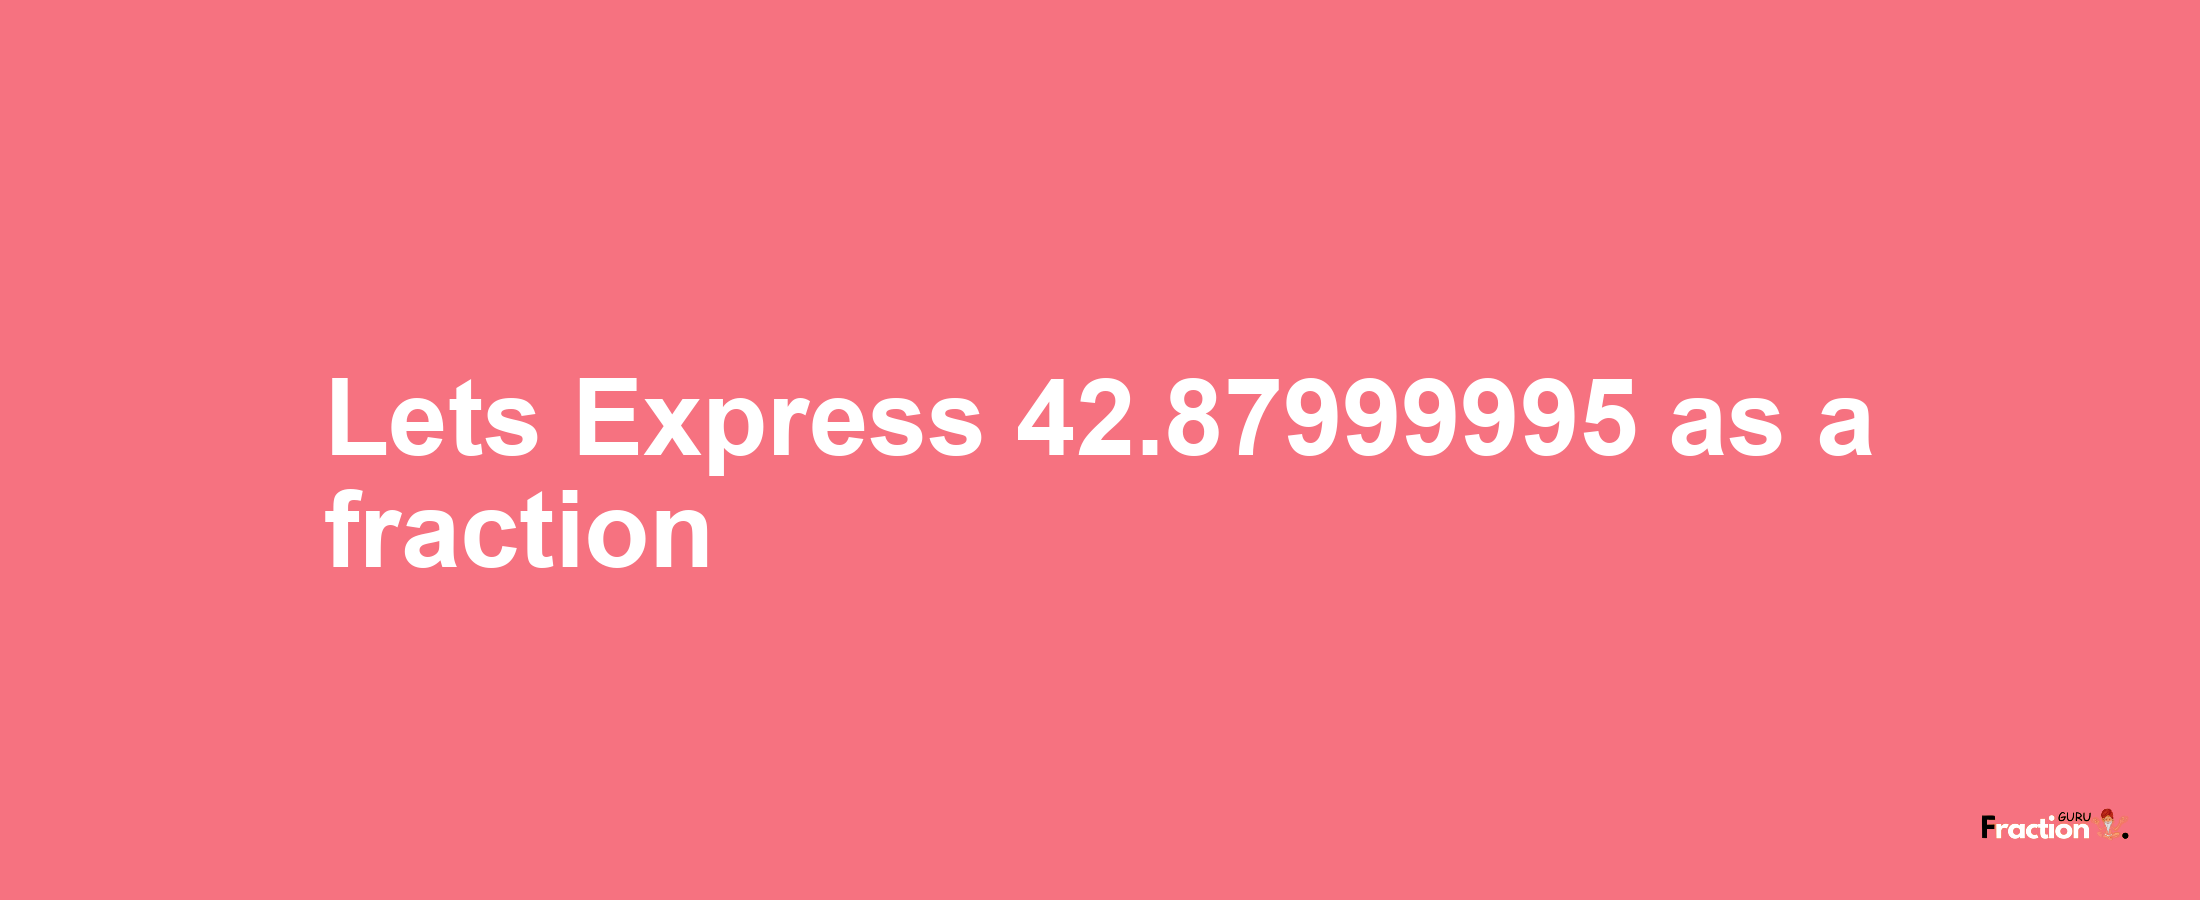 Lets Express 42.87999995 as afraction